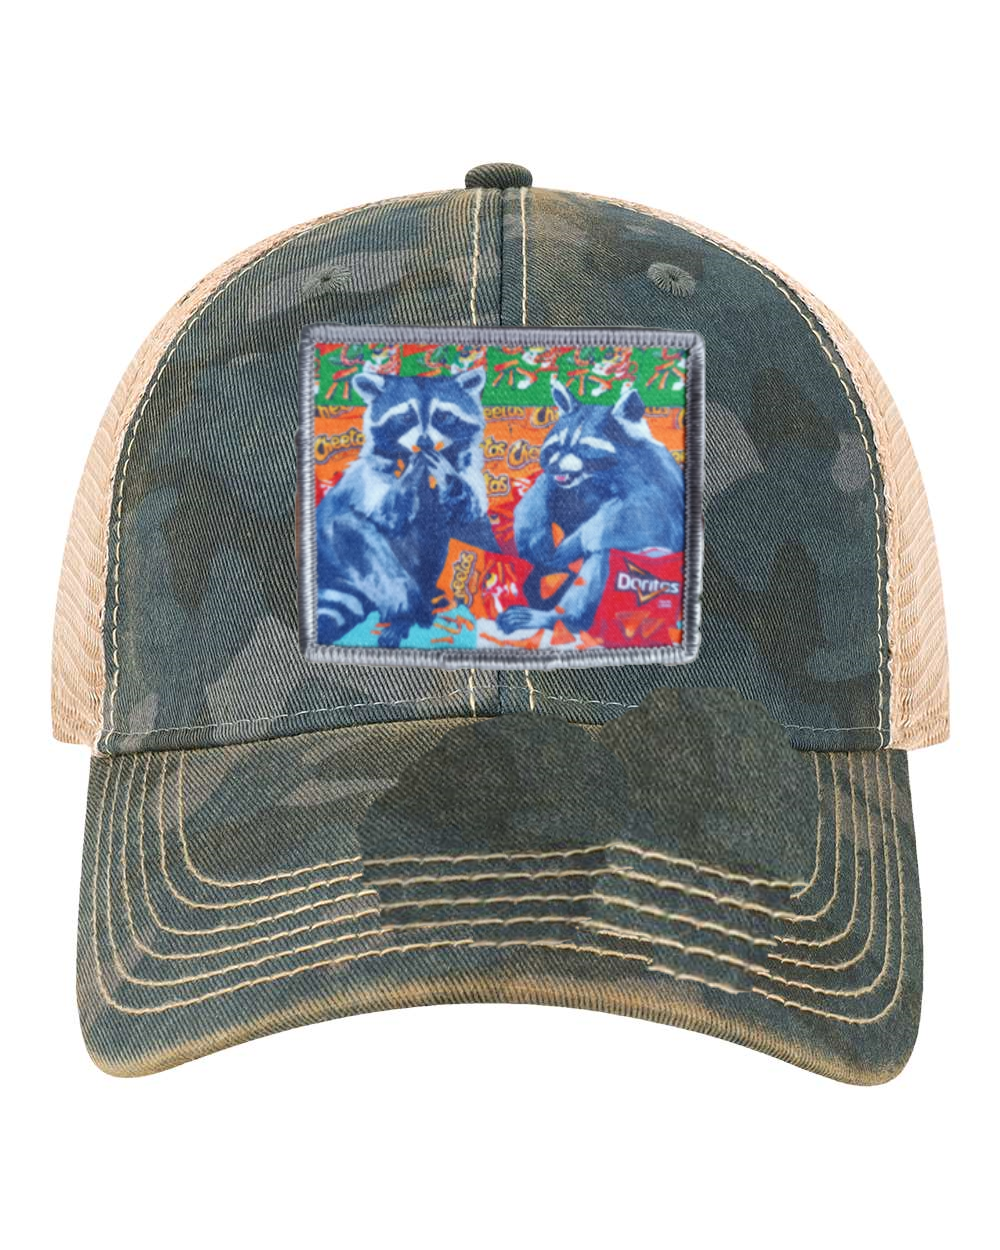 Navy Camo Unstructured Hats Flyn Costello Junkfood Bandits  